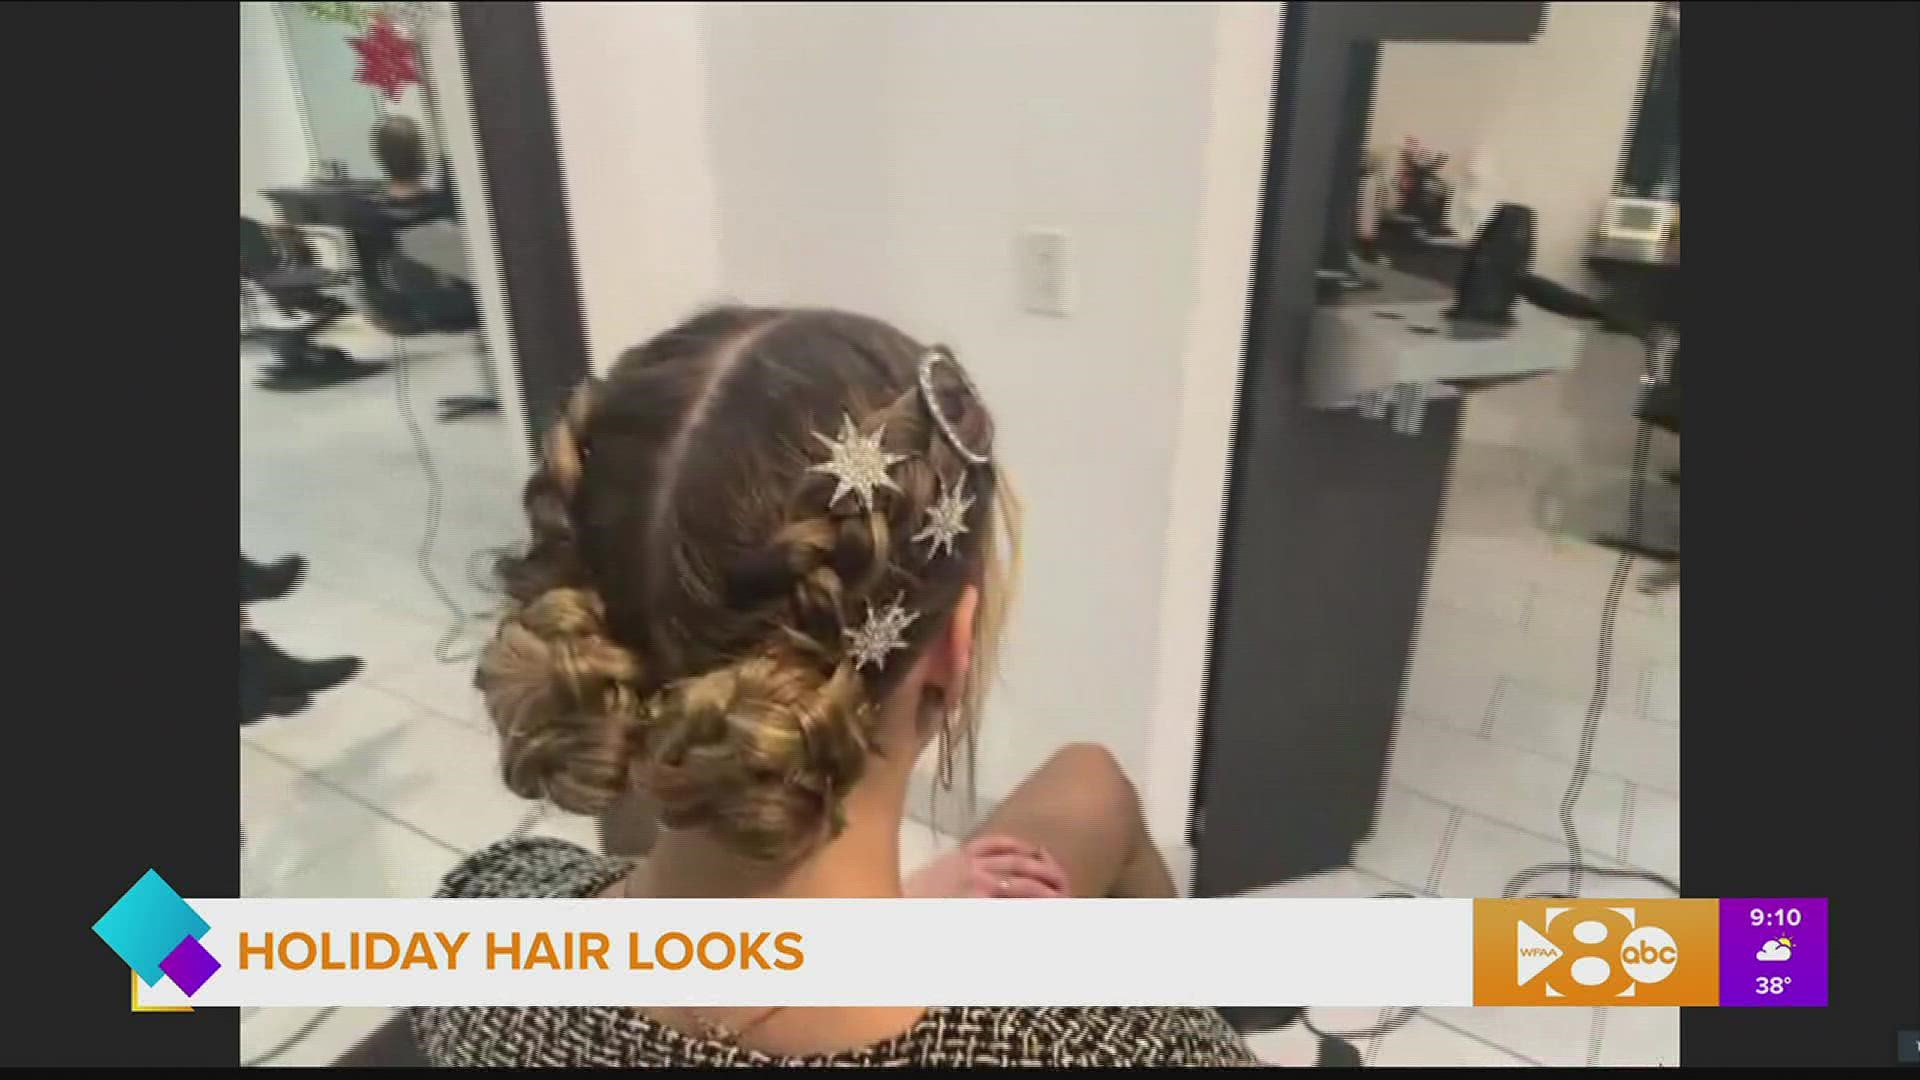 Jean Philippe of Jean Philippe Salon shows you how to style and accessorize your hair for holiday parties